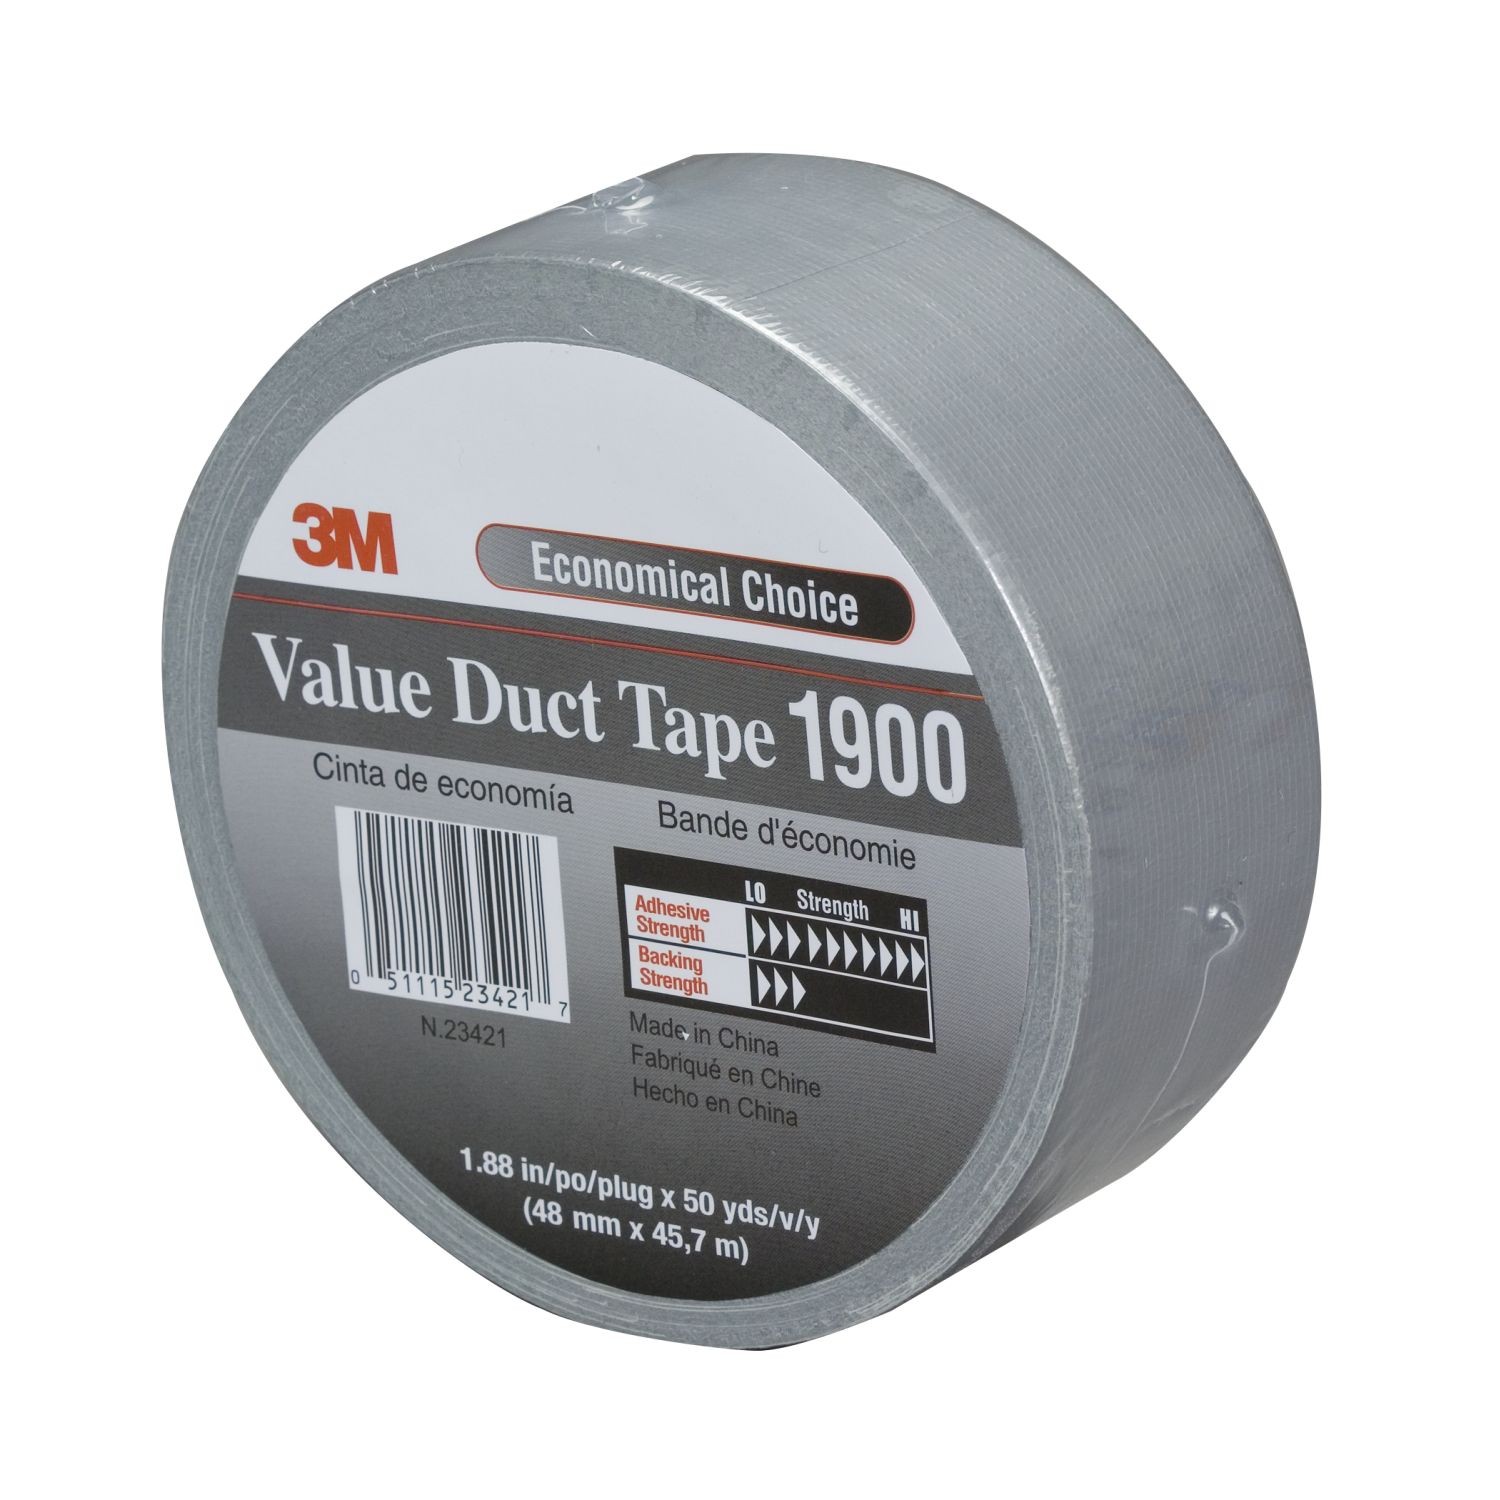 3M™ Value Duct Tape 1900, Silver, 1.88 in x 50 yd, 5.8 mil, 24 per case, Individually Wrapped Conveniently Packaged